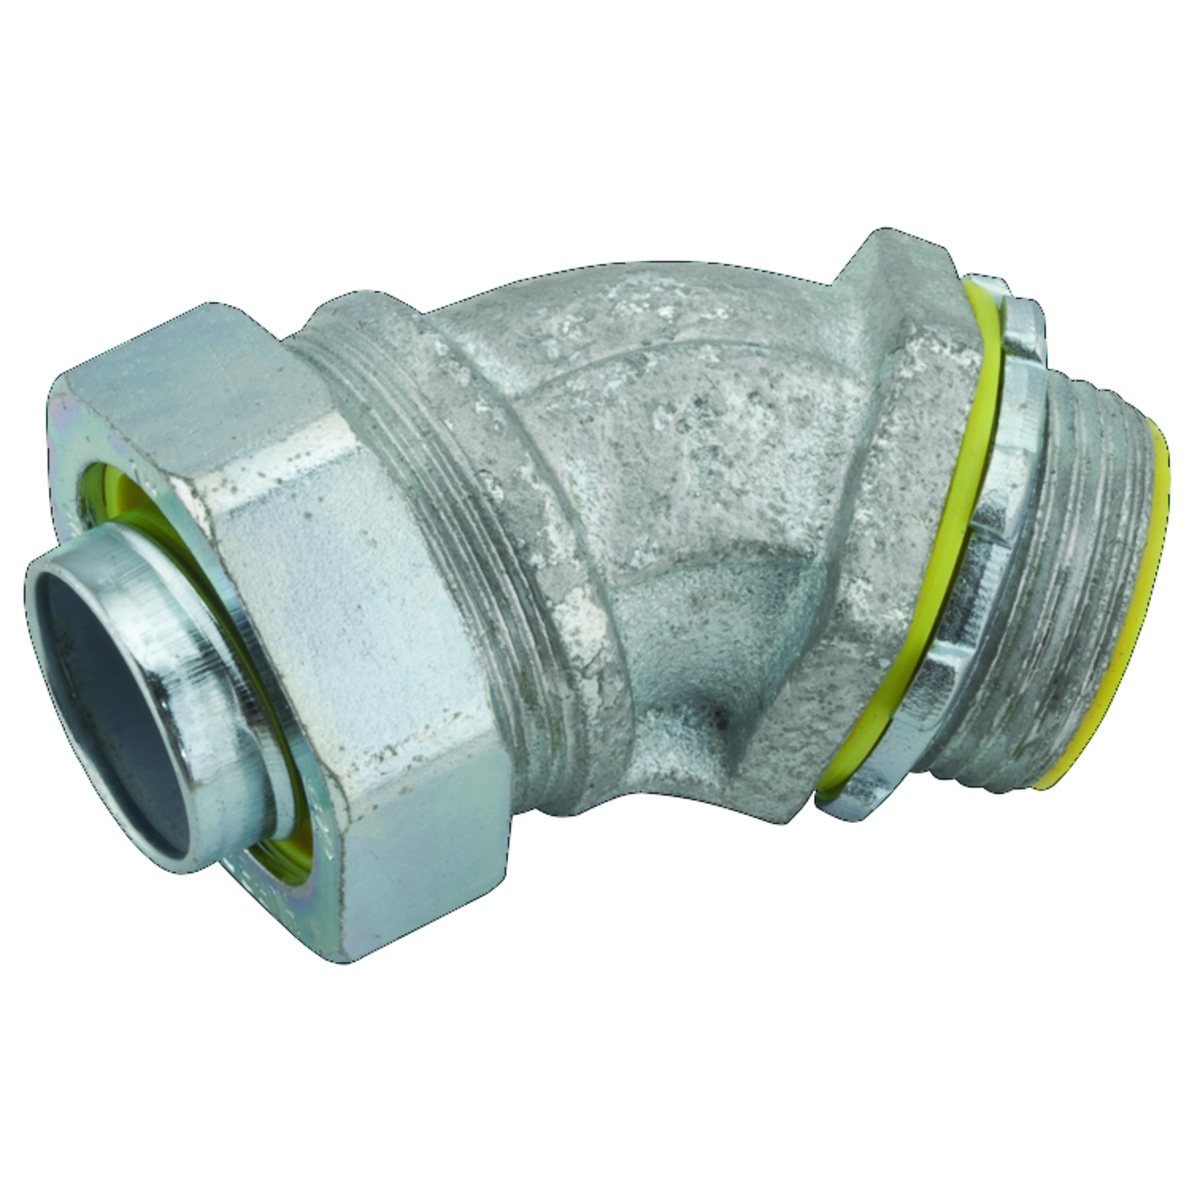 RACO 3561 3/8" 45D INSULATED LIQUIDTIGHT CONNECTOR